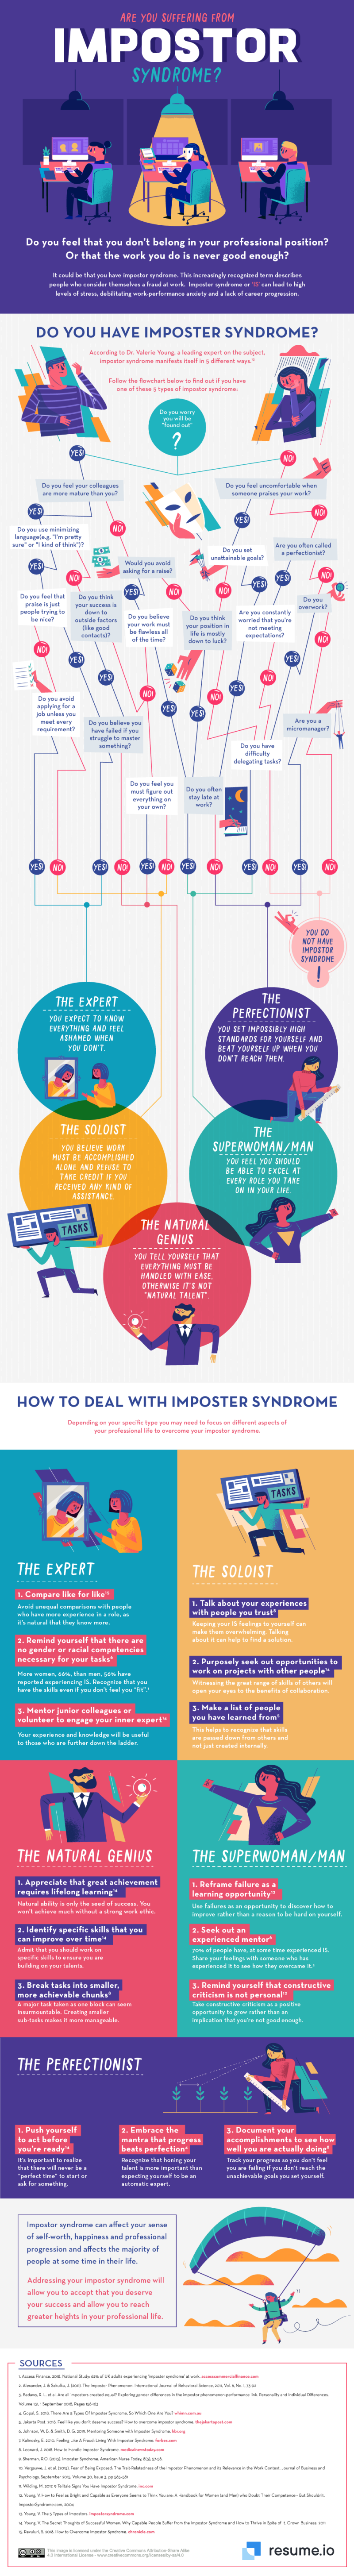 Imposter Syndrome